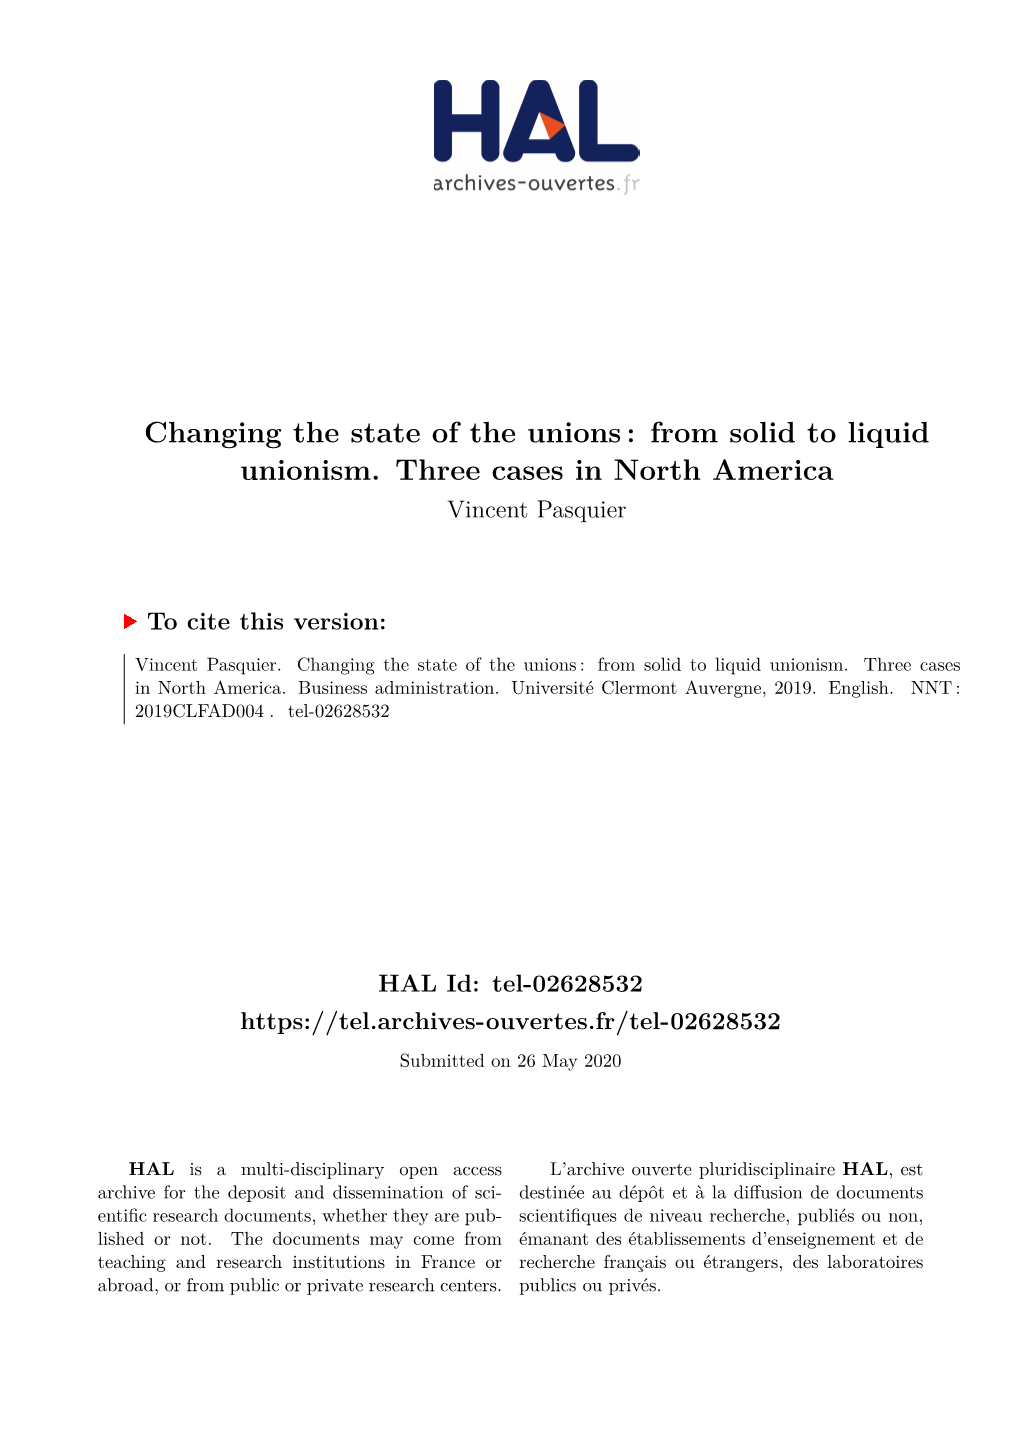 Changing the State of the Unions: from Solid to Liquid Unionism. Three Cases in North America